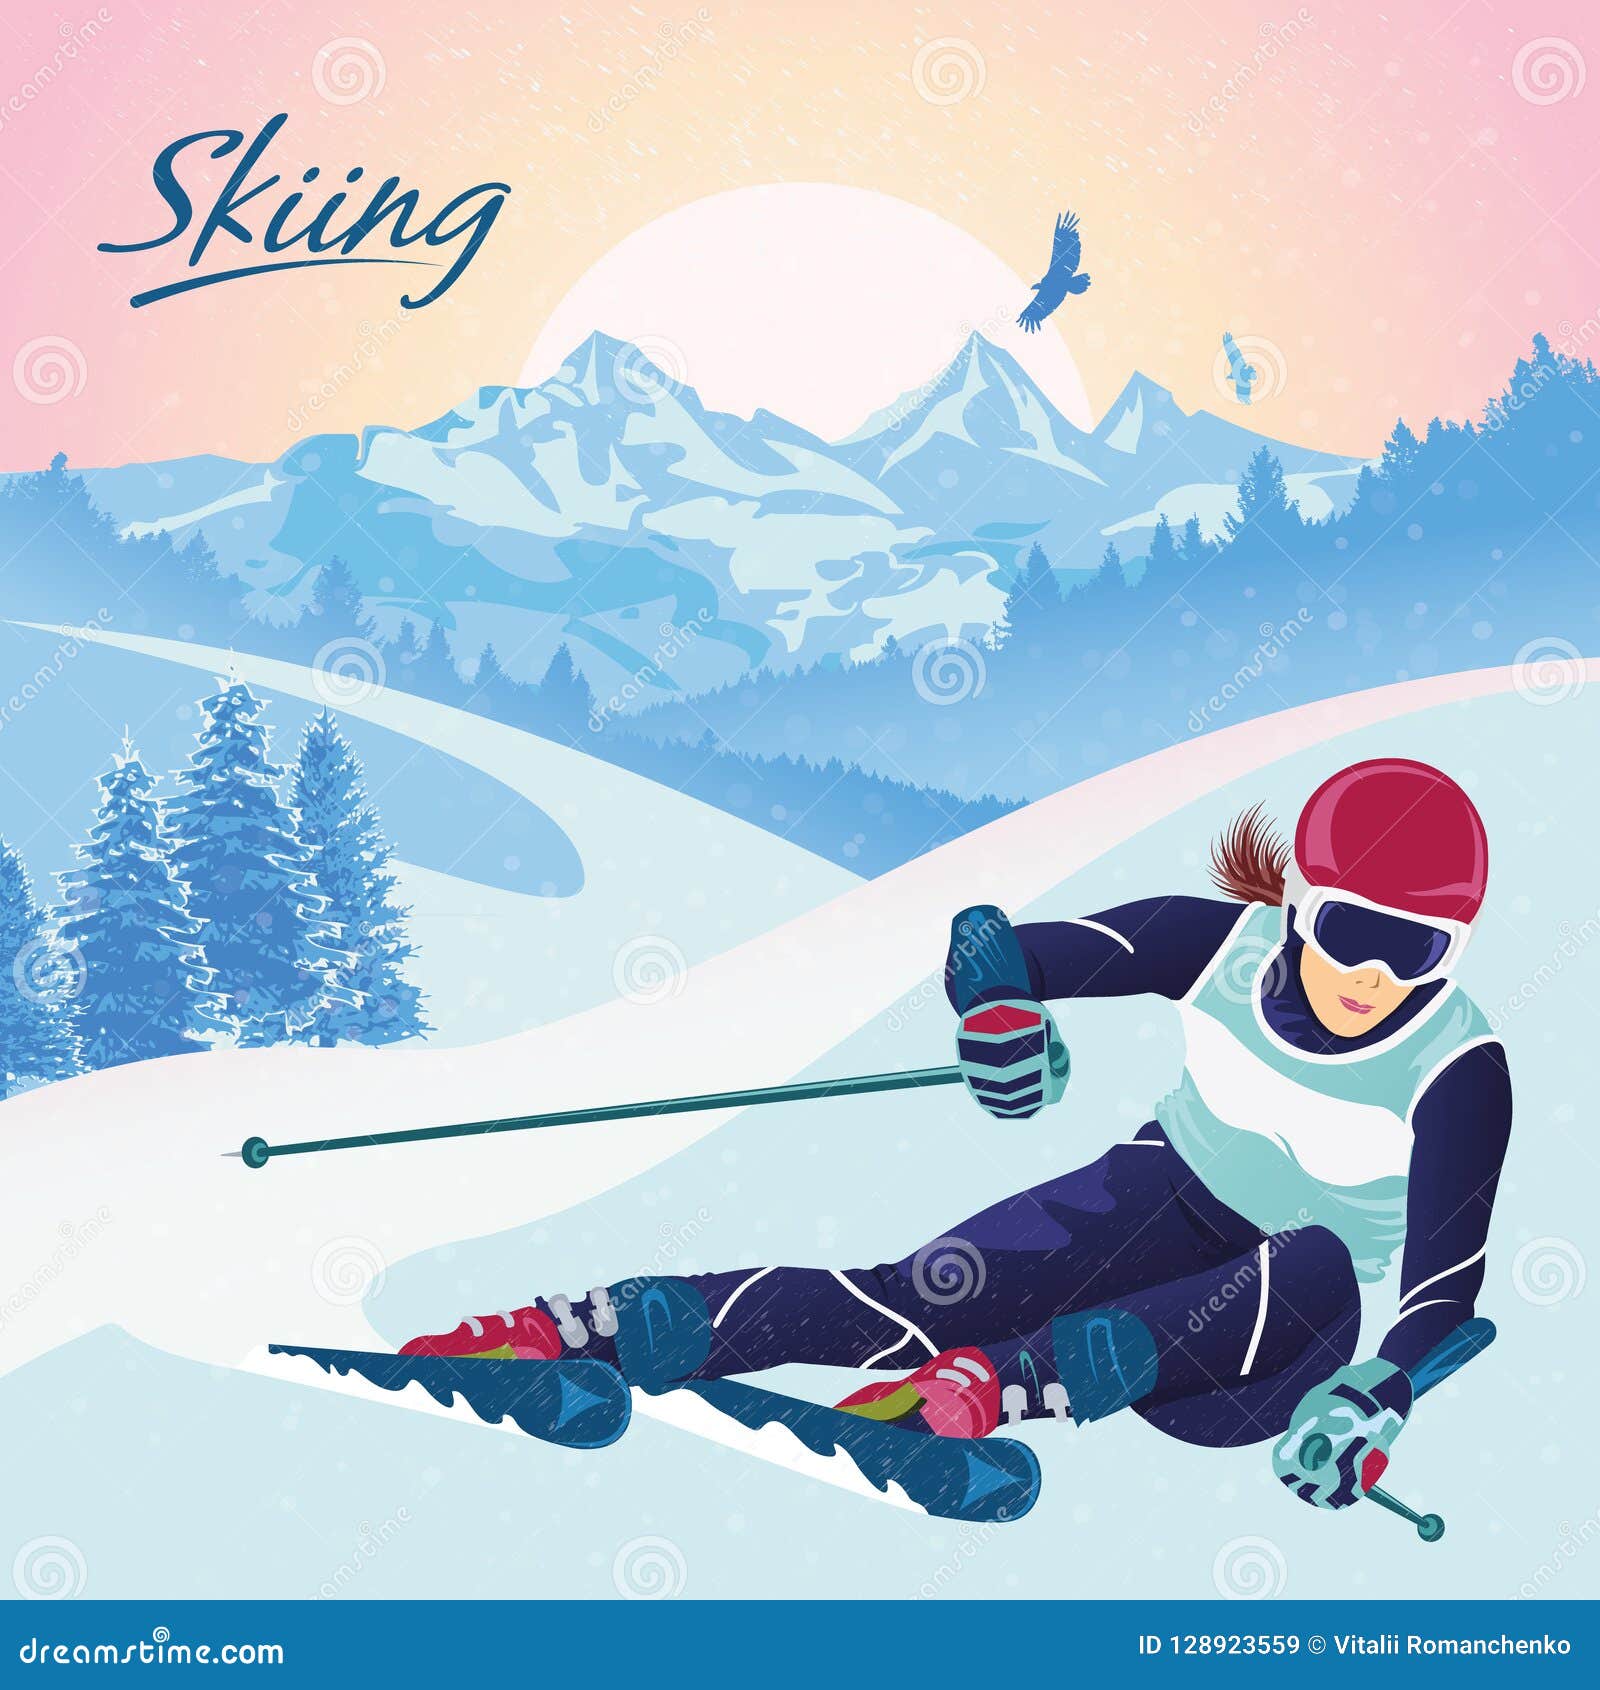 Skiing in the Mountains. Vector Illustration that Promotes Recreation ...